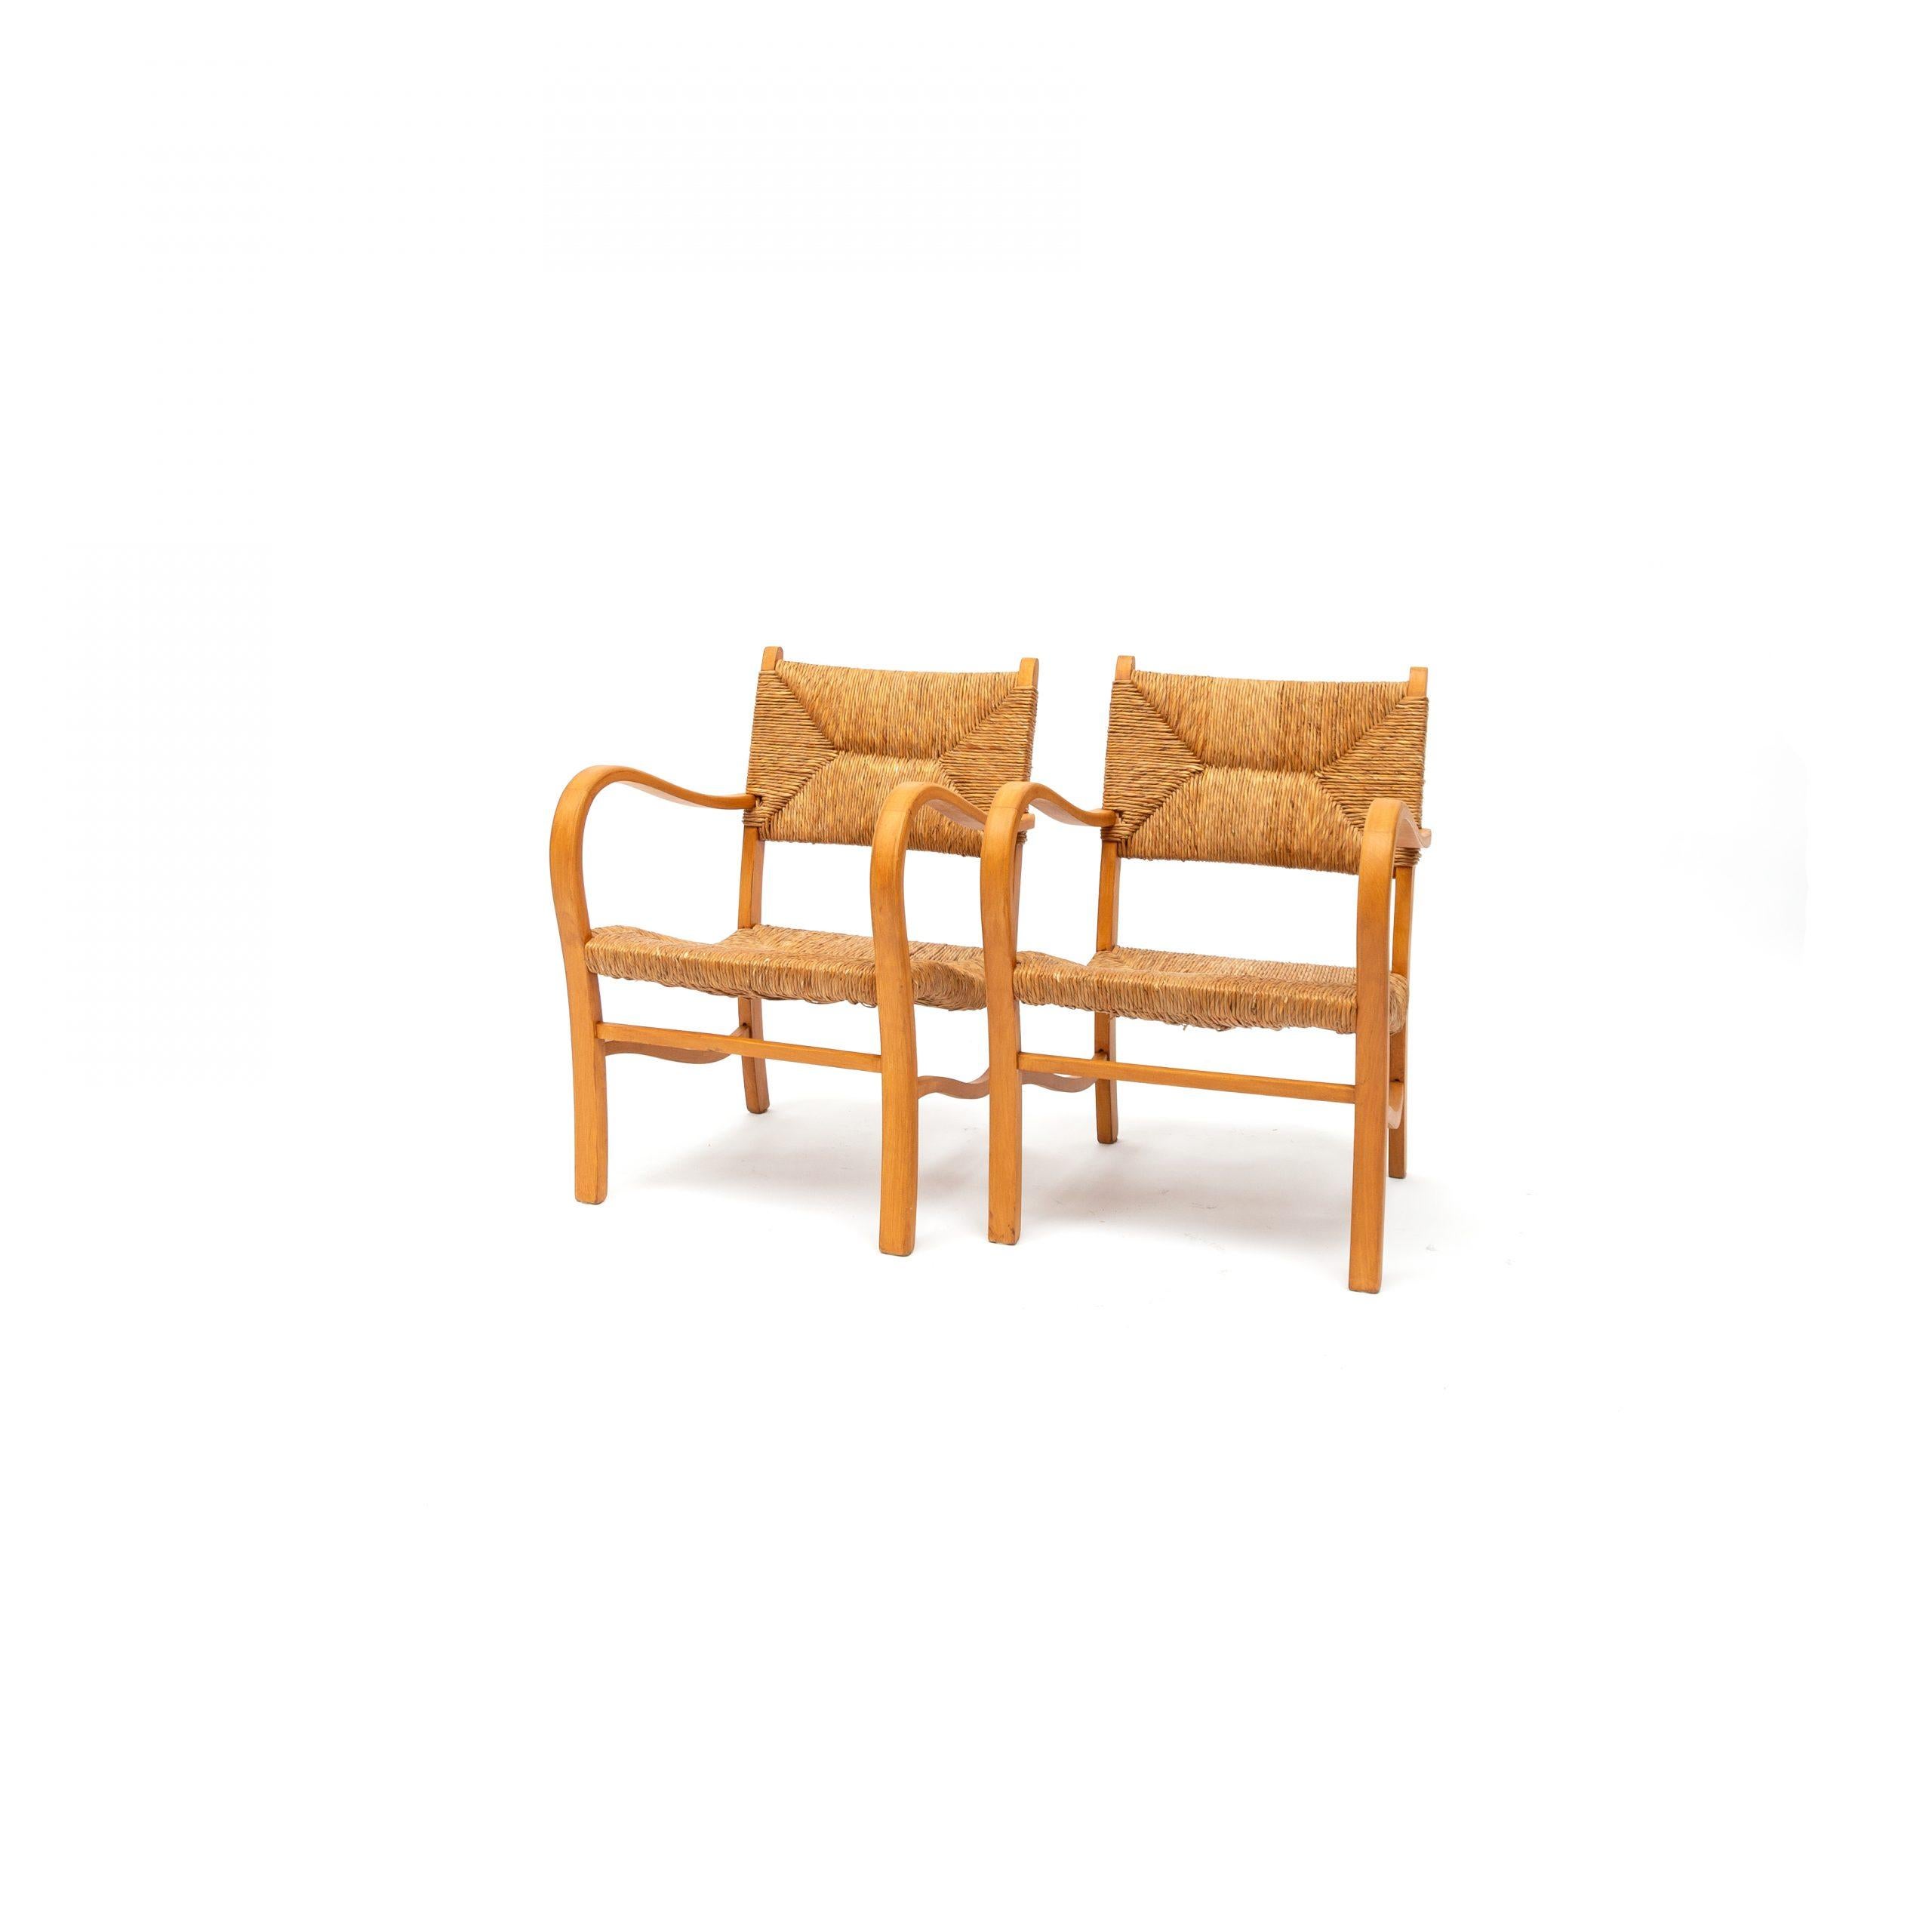 These wavy, elegant armchairs with are executed in a bent beech wooden frame. The gentle curves of the frame that is repeated in the armrests make this set look very sculptural.

Scandinavian beechwood armchair, set, 1970s quantity.

 